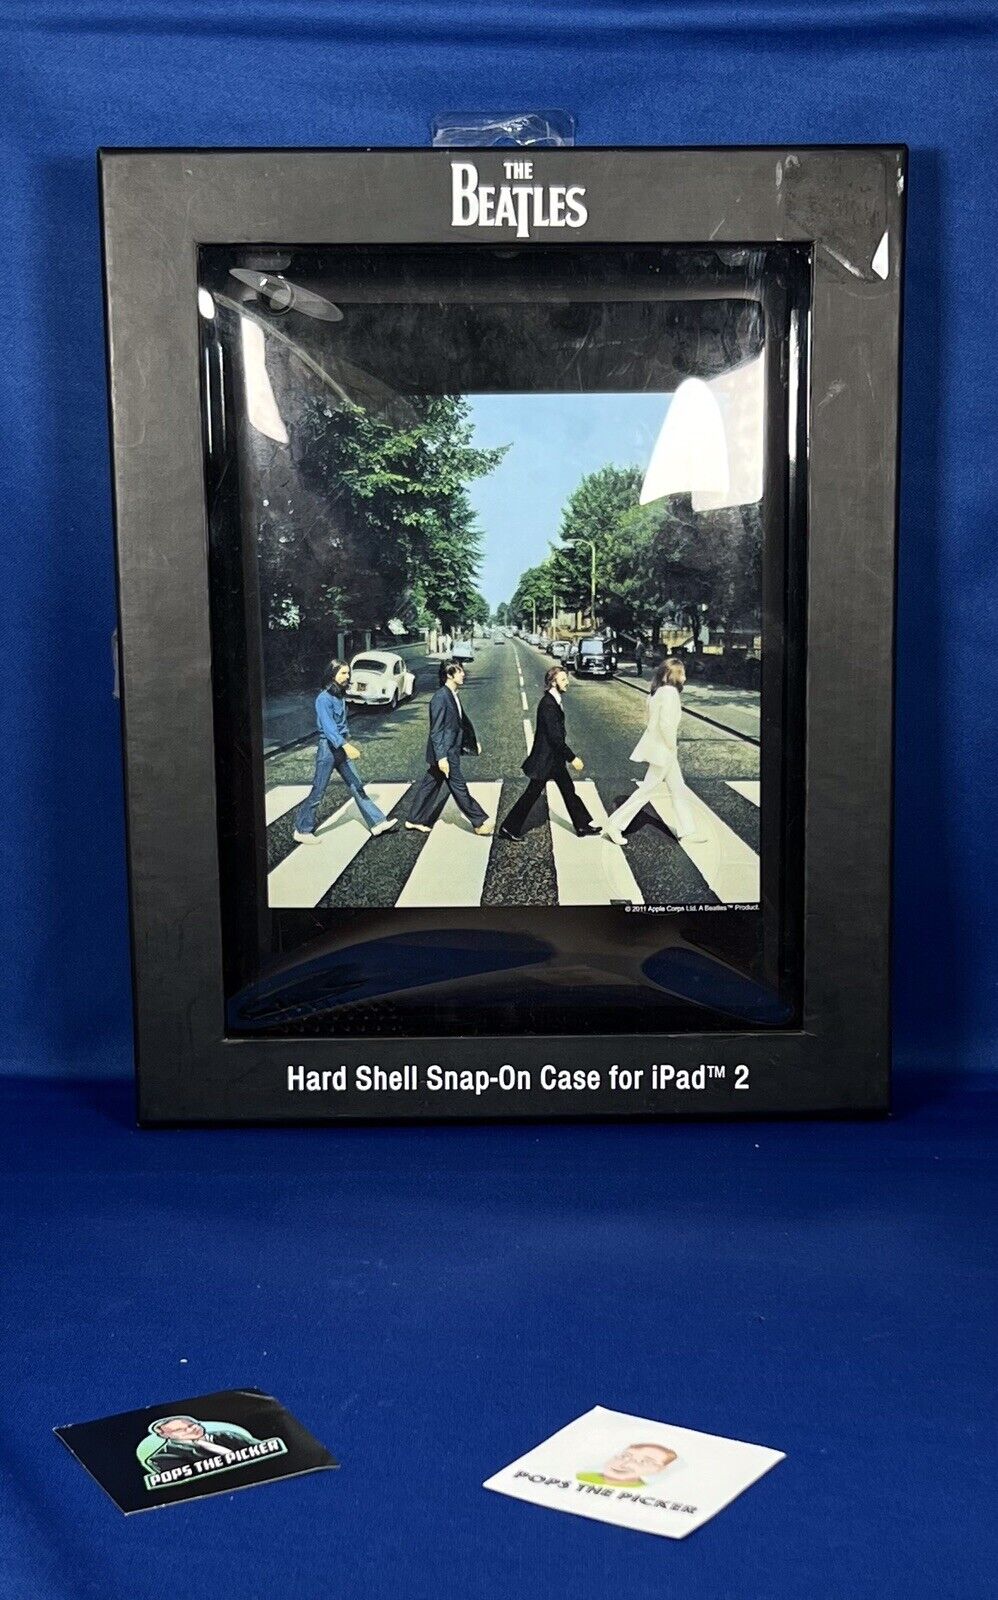 The Beatles Abby Road Snap-On Case for iPad 2